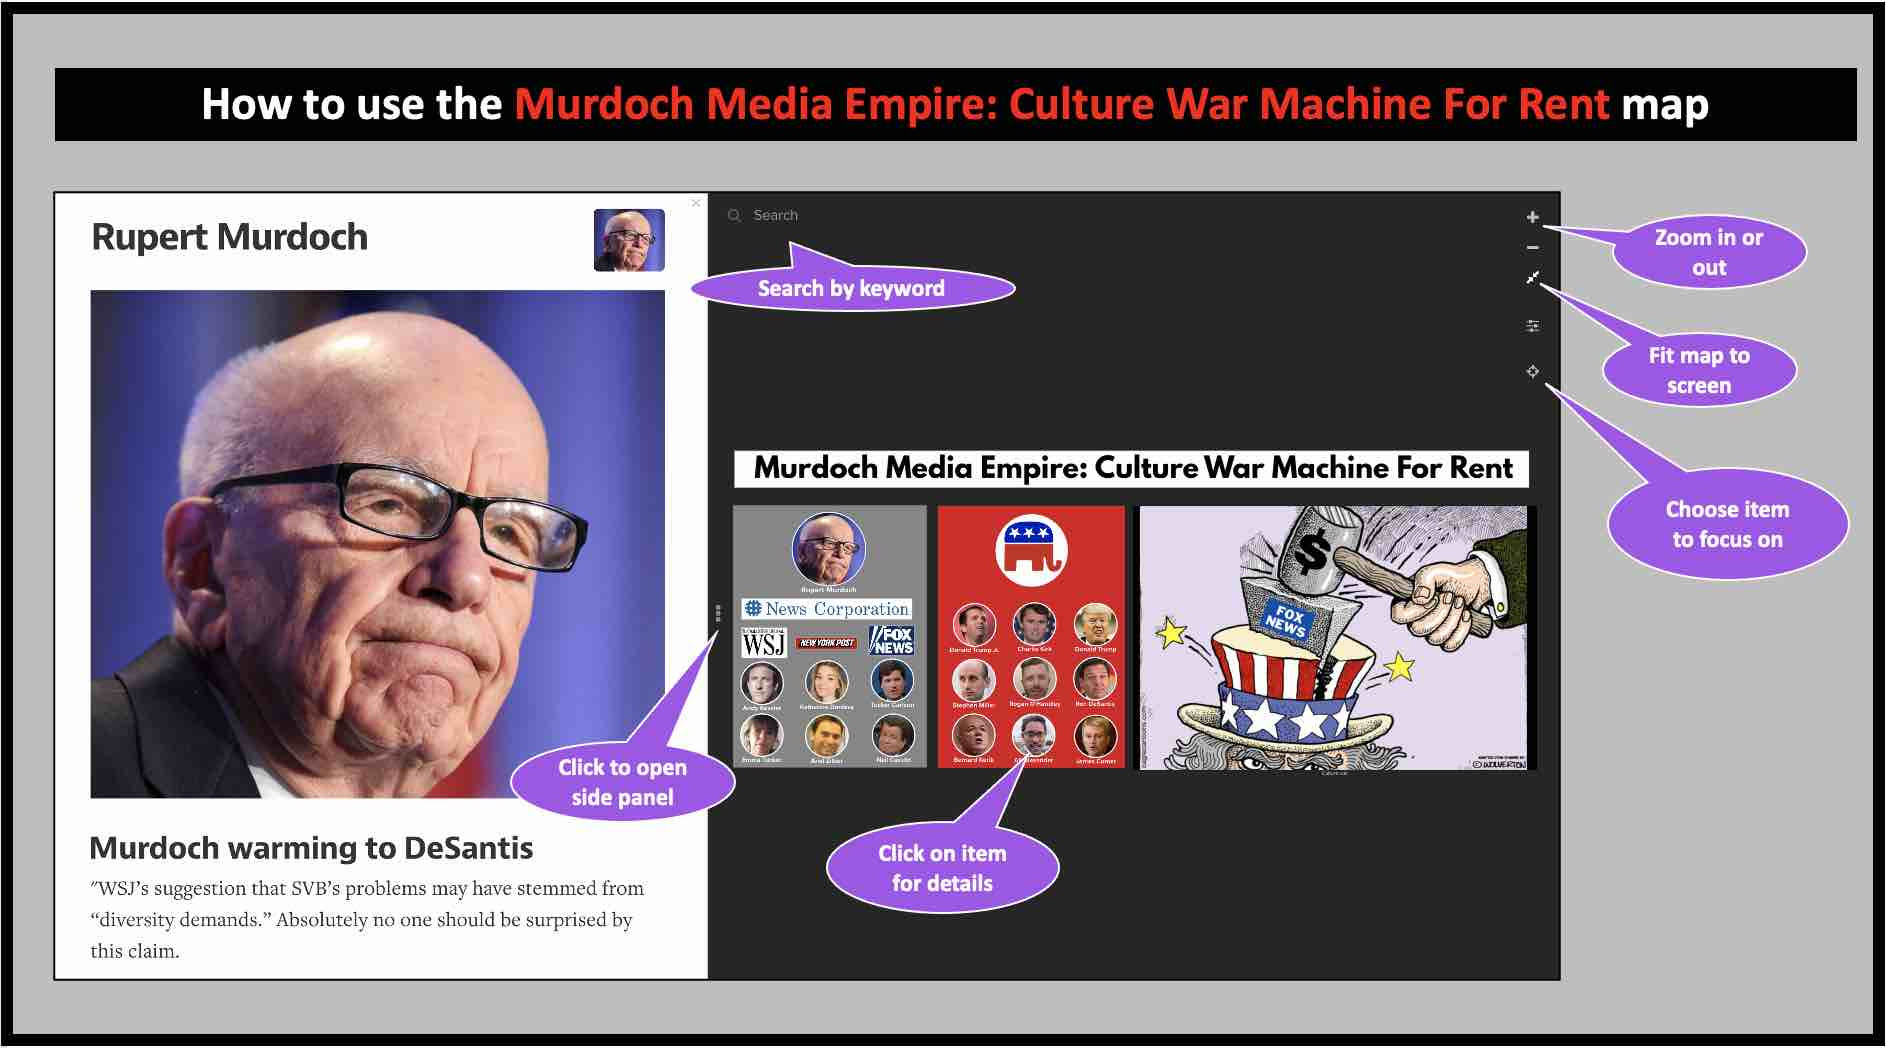 How to use the Murdoch Media Empire Culture War Machine For Rent map